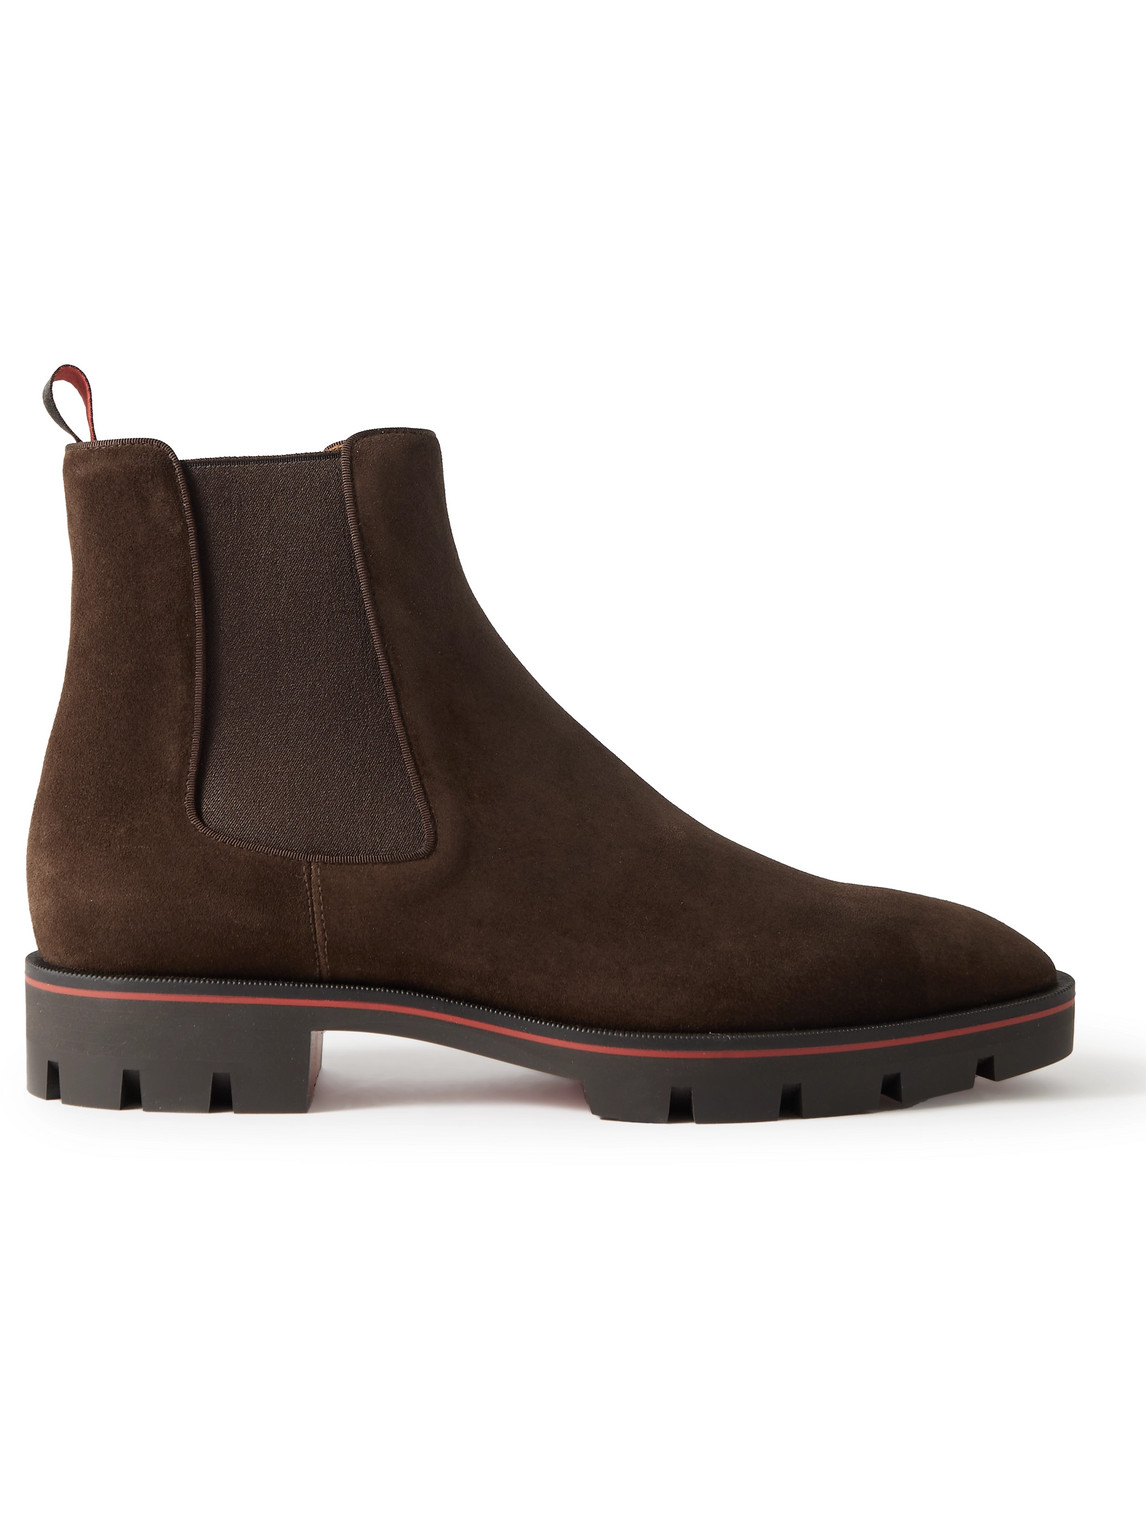 Alpino Suede Chelsea Boots